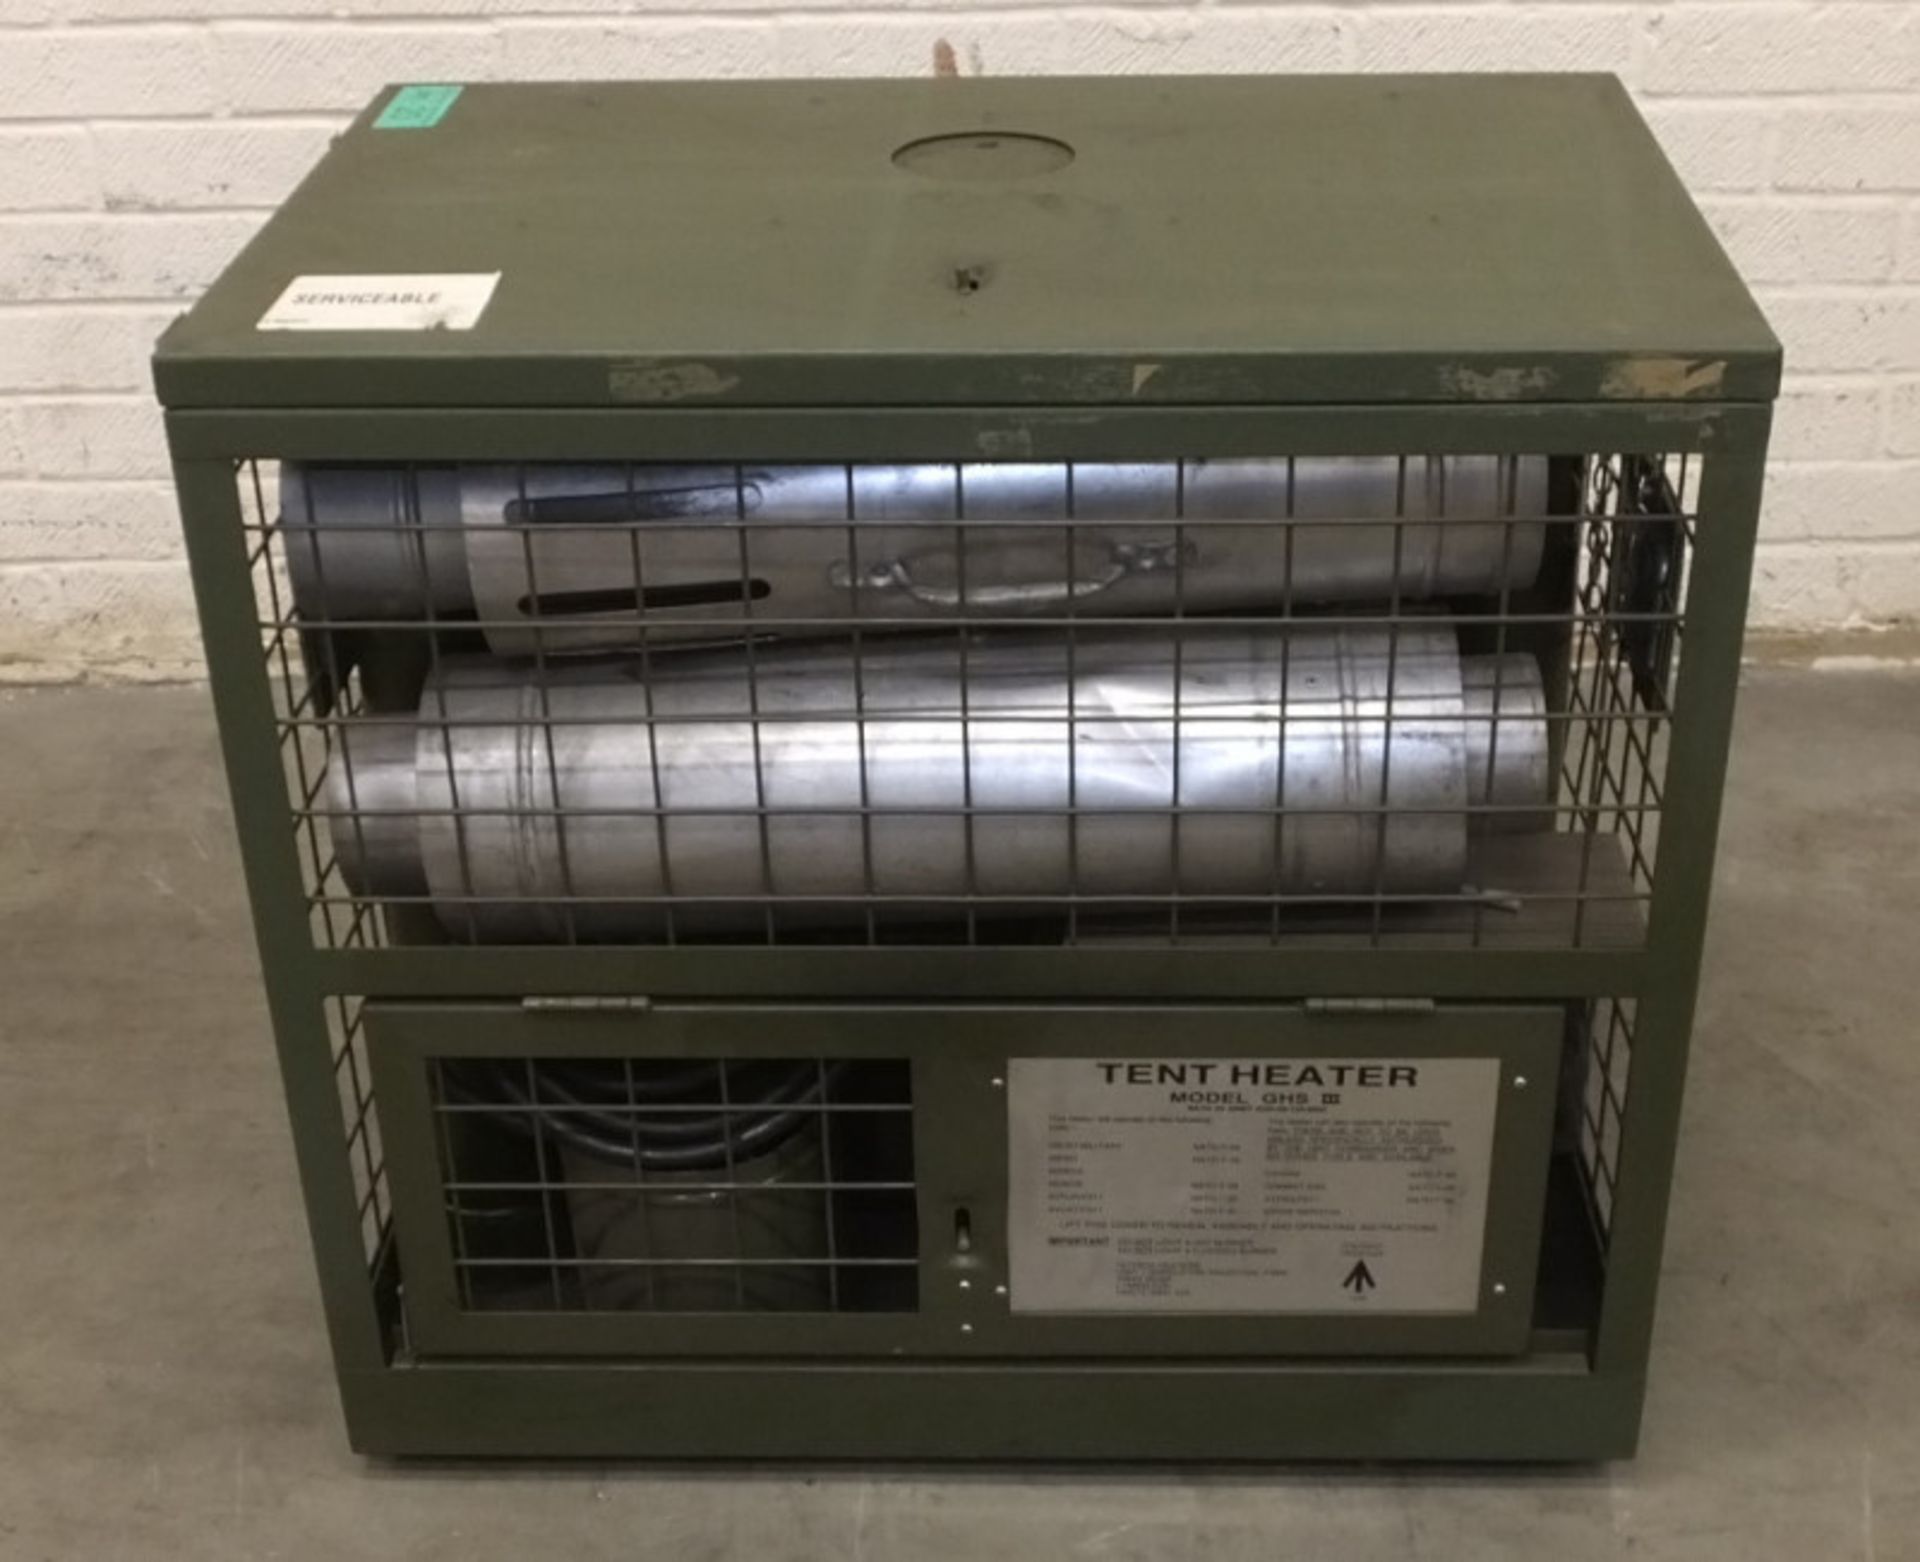 HotBox Heaters Tent Heater GHS III - NSN 4520-99-130-6045 Output - 5-15kW, Ex-MOD specific - Image 9 of 11